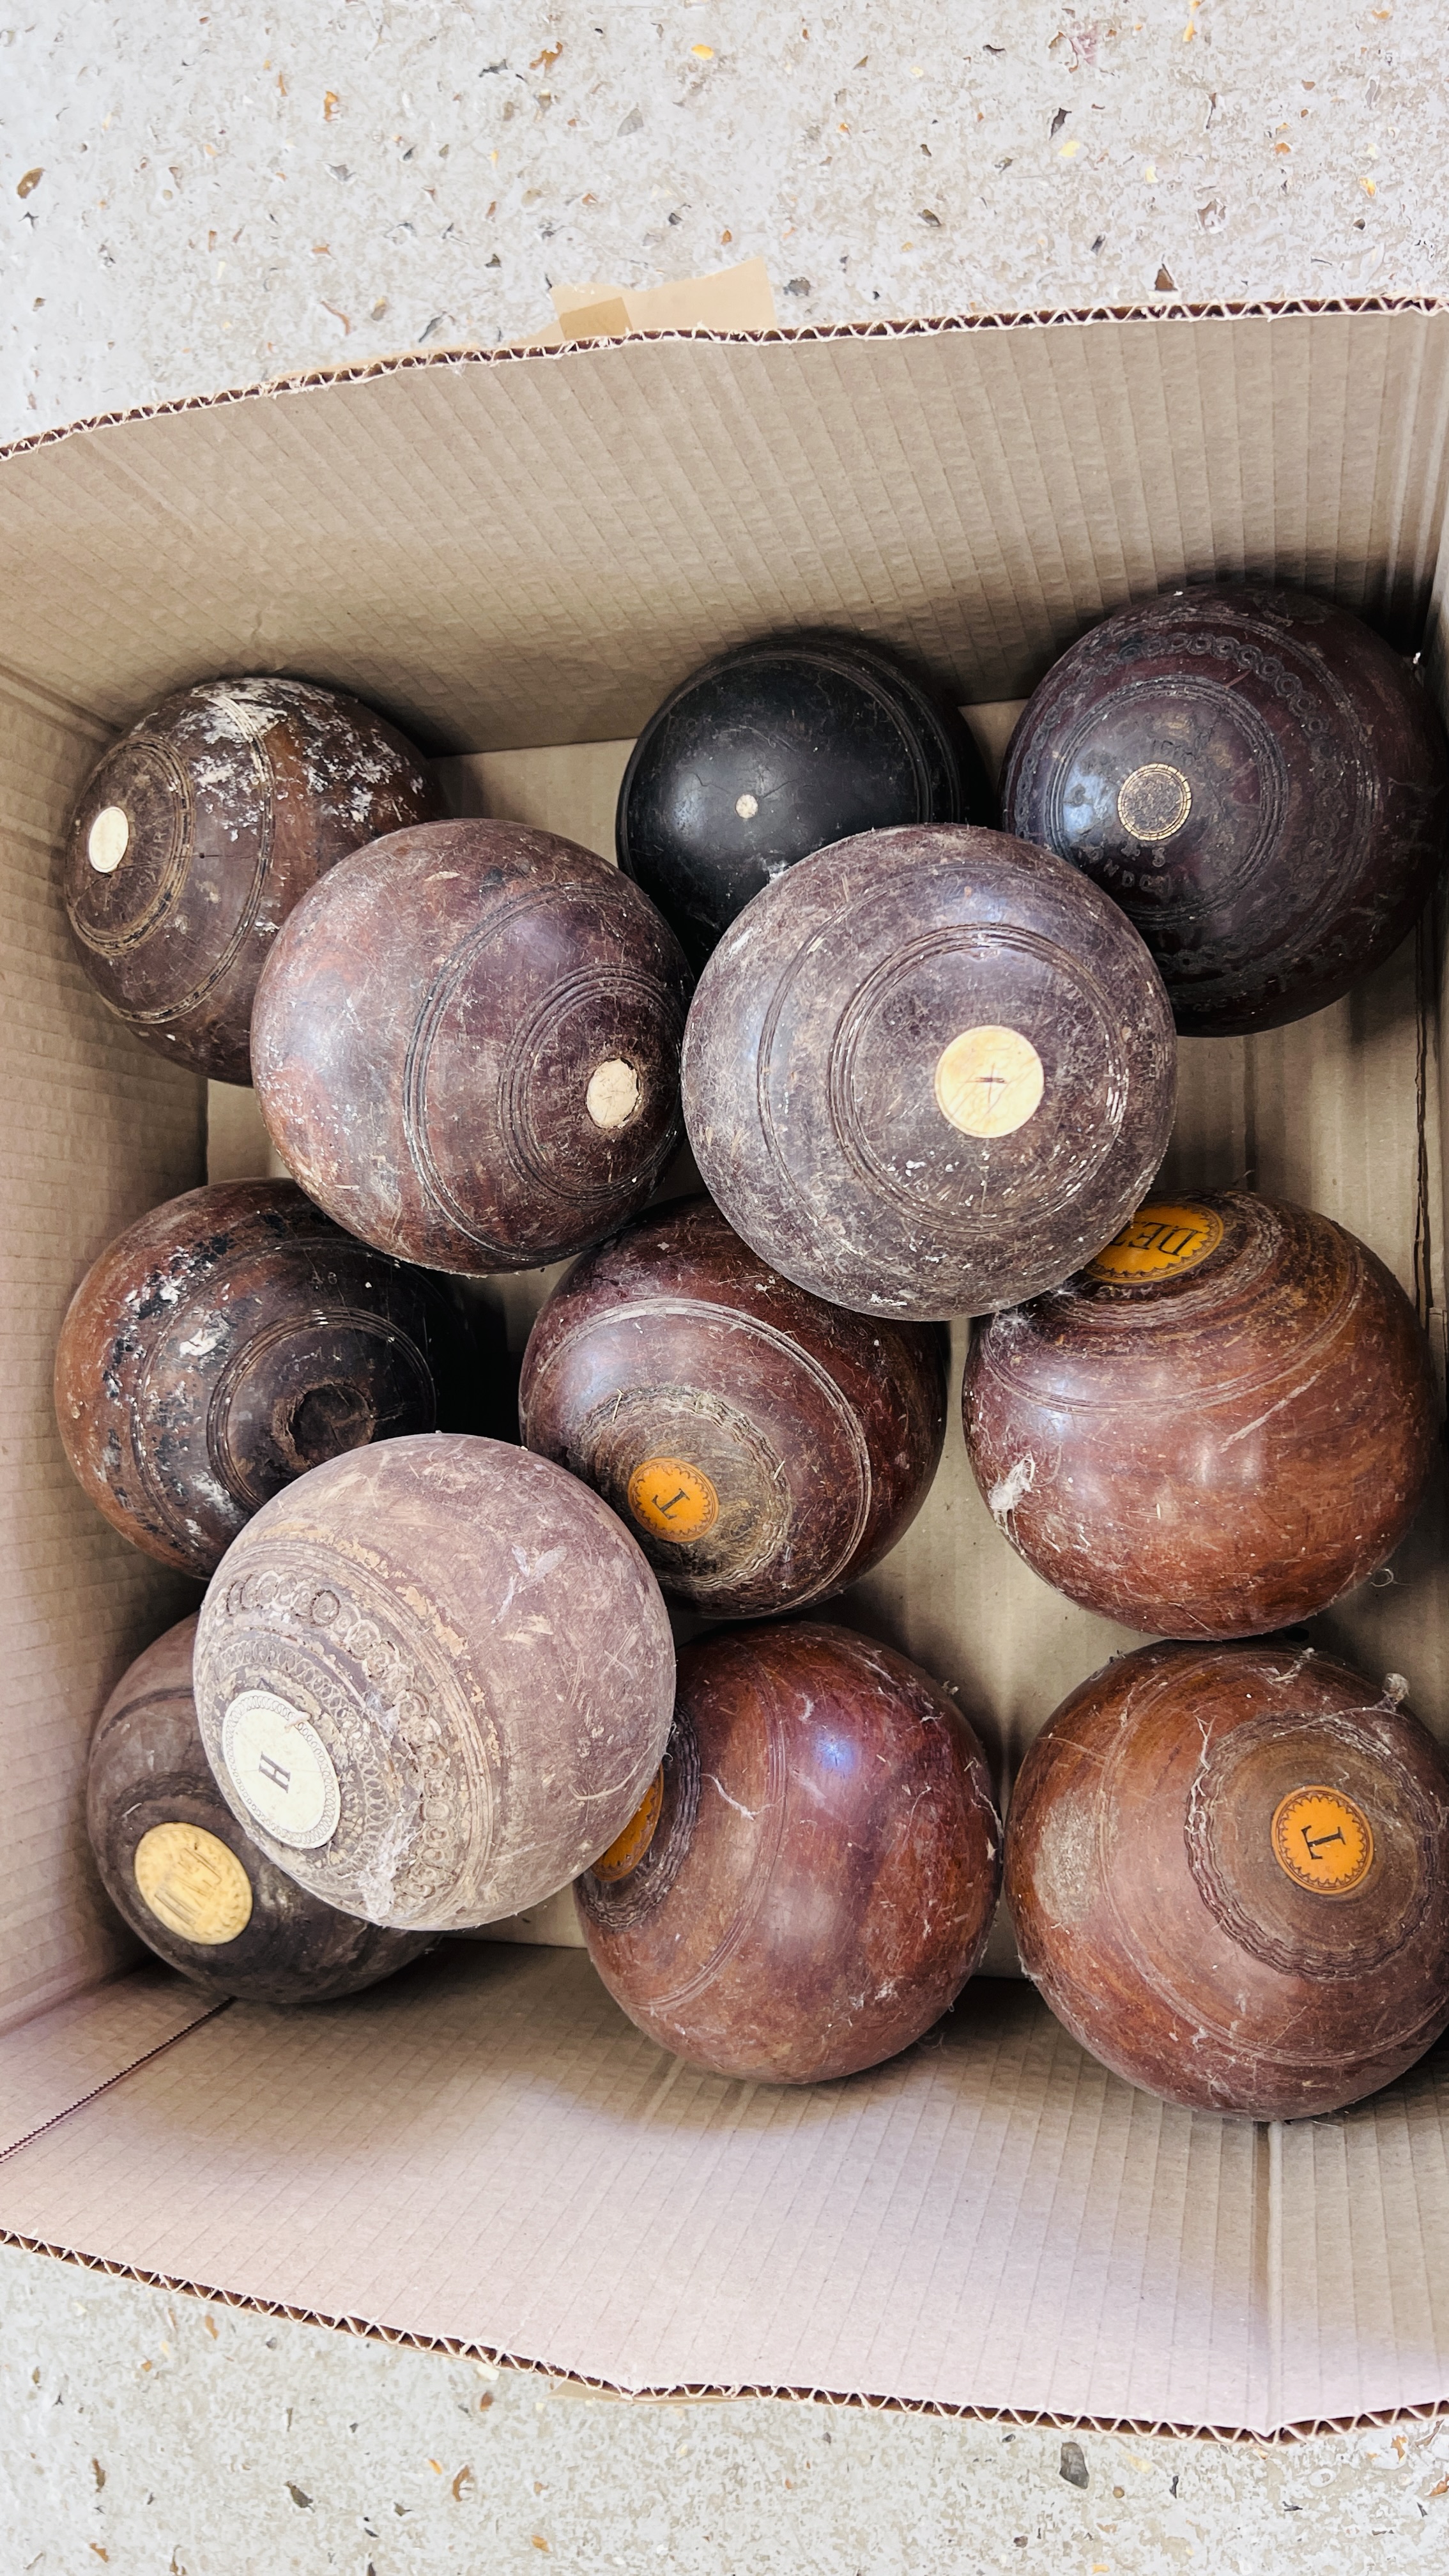 12 ASSORTED WOODEN LAWN BOWLS